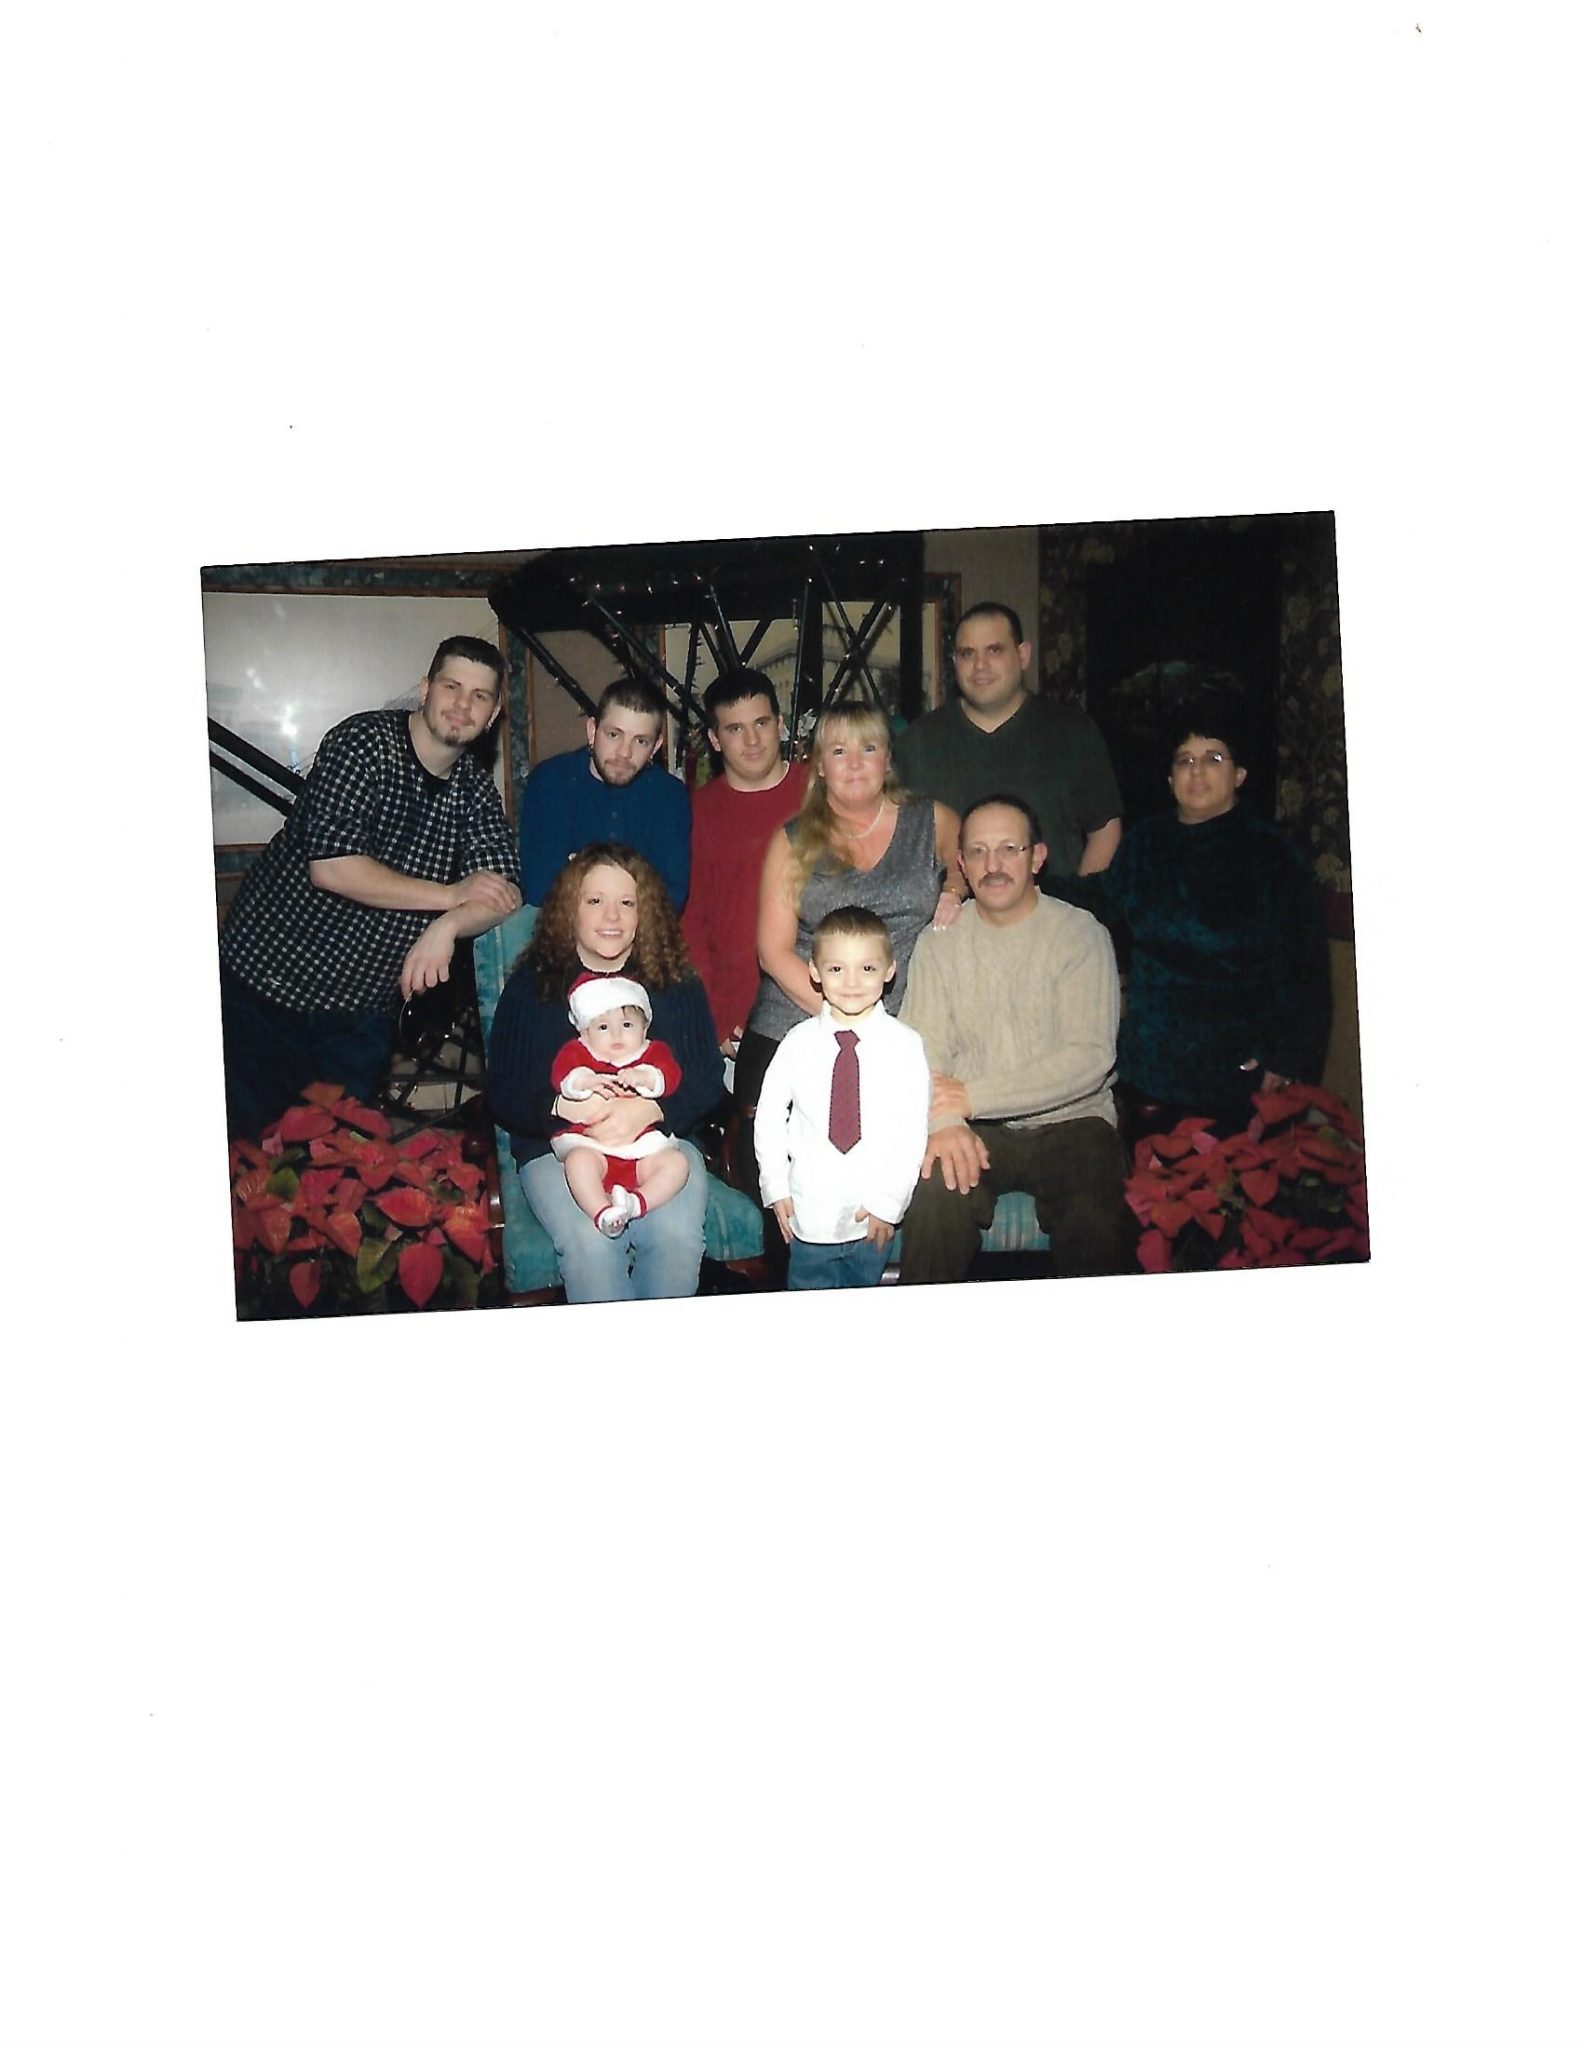 Family Christmas in Watertown NY in 2005. <br />
Kenneth P. Nyland III, Monica, Tia, Alex<br />
Kenneth P. Nyland Sr, Kimberly Nyland<br />
Kevin Nyland<br />
Cindy Nyland-Hunt, Eric Hunt, Douglas Lockrow Jr